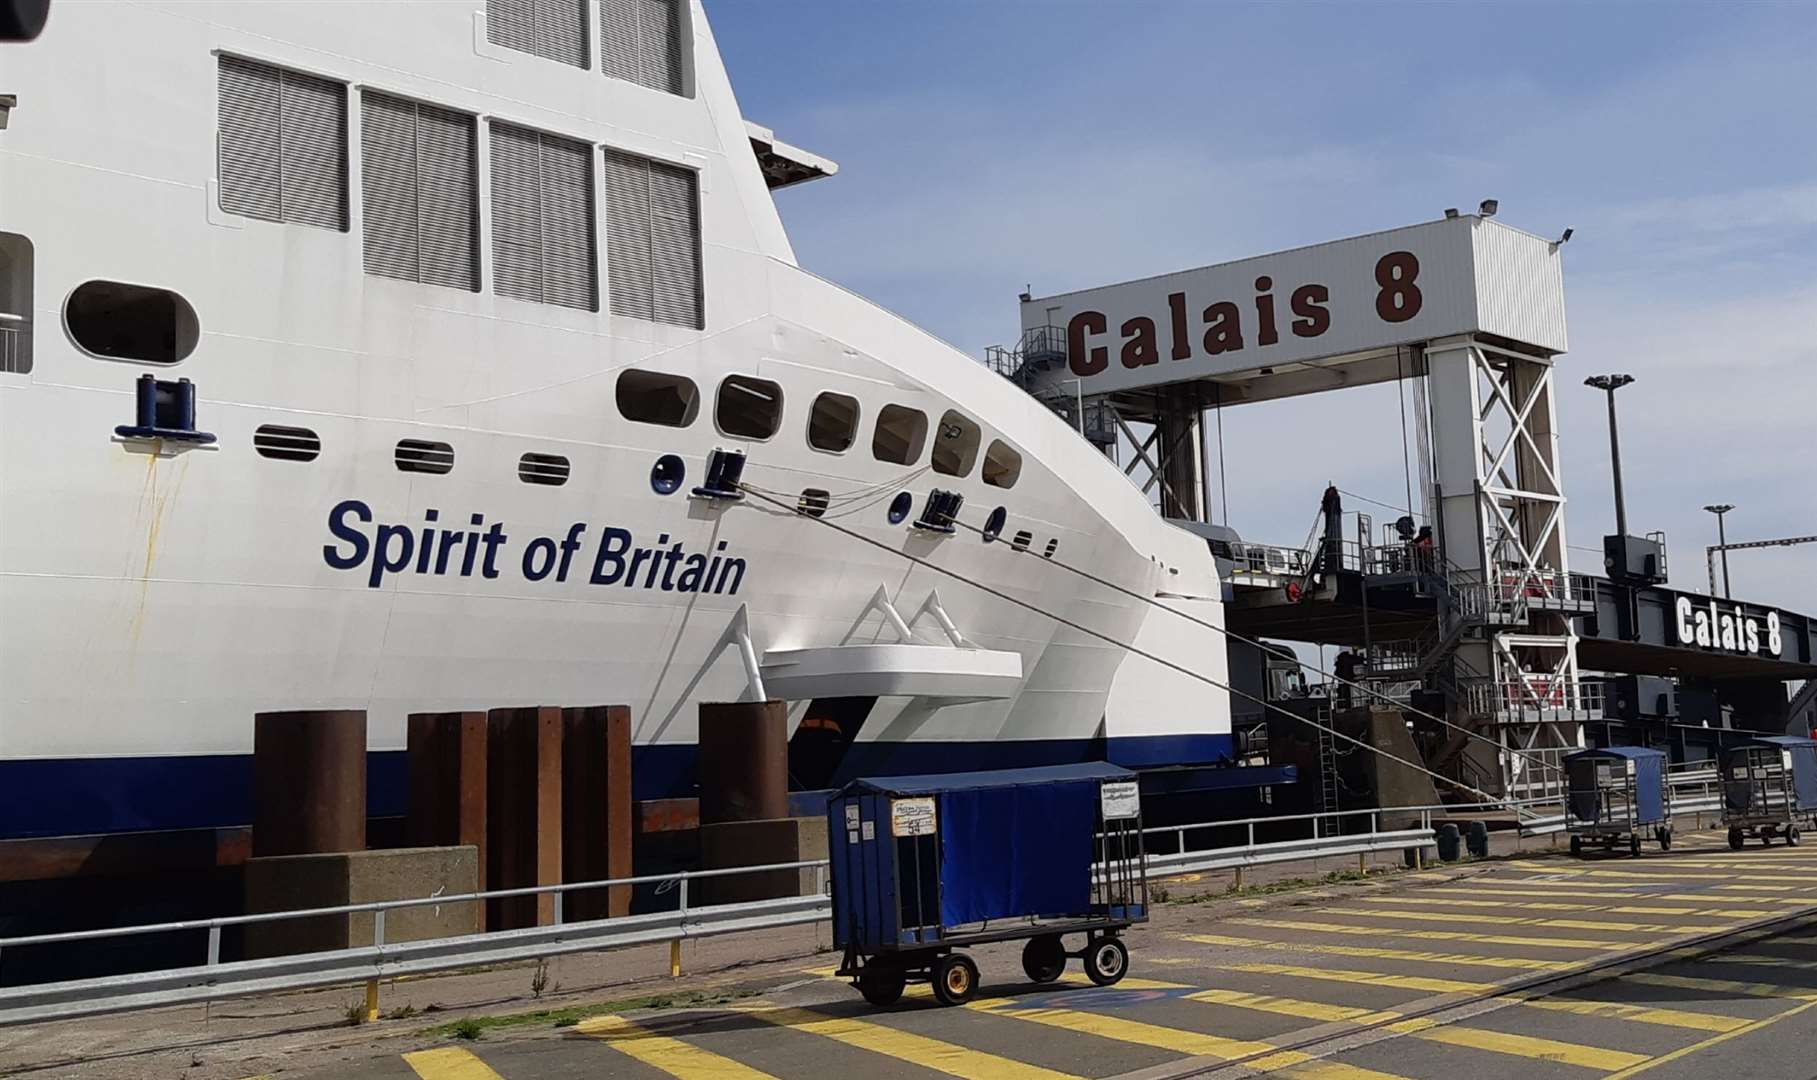 The P&O Ferries Spirit of Britain - sailings to Calais are as normal all this year.